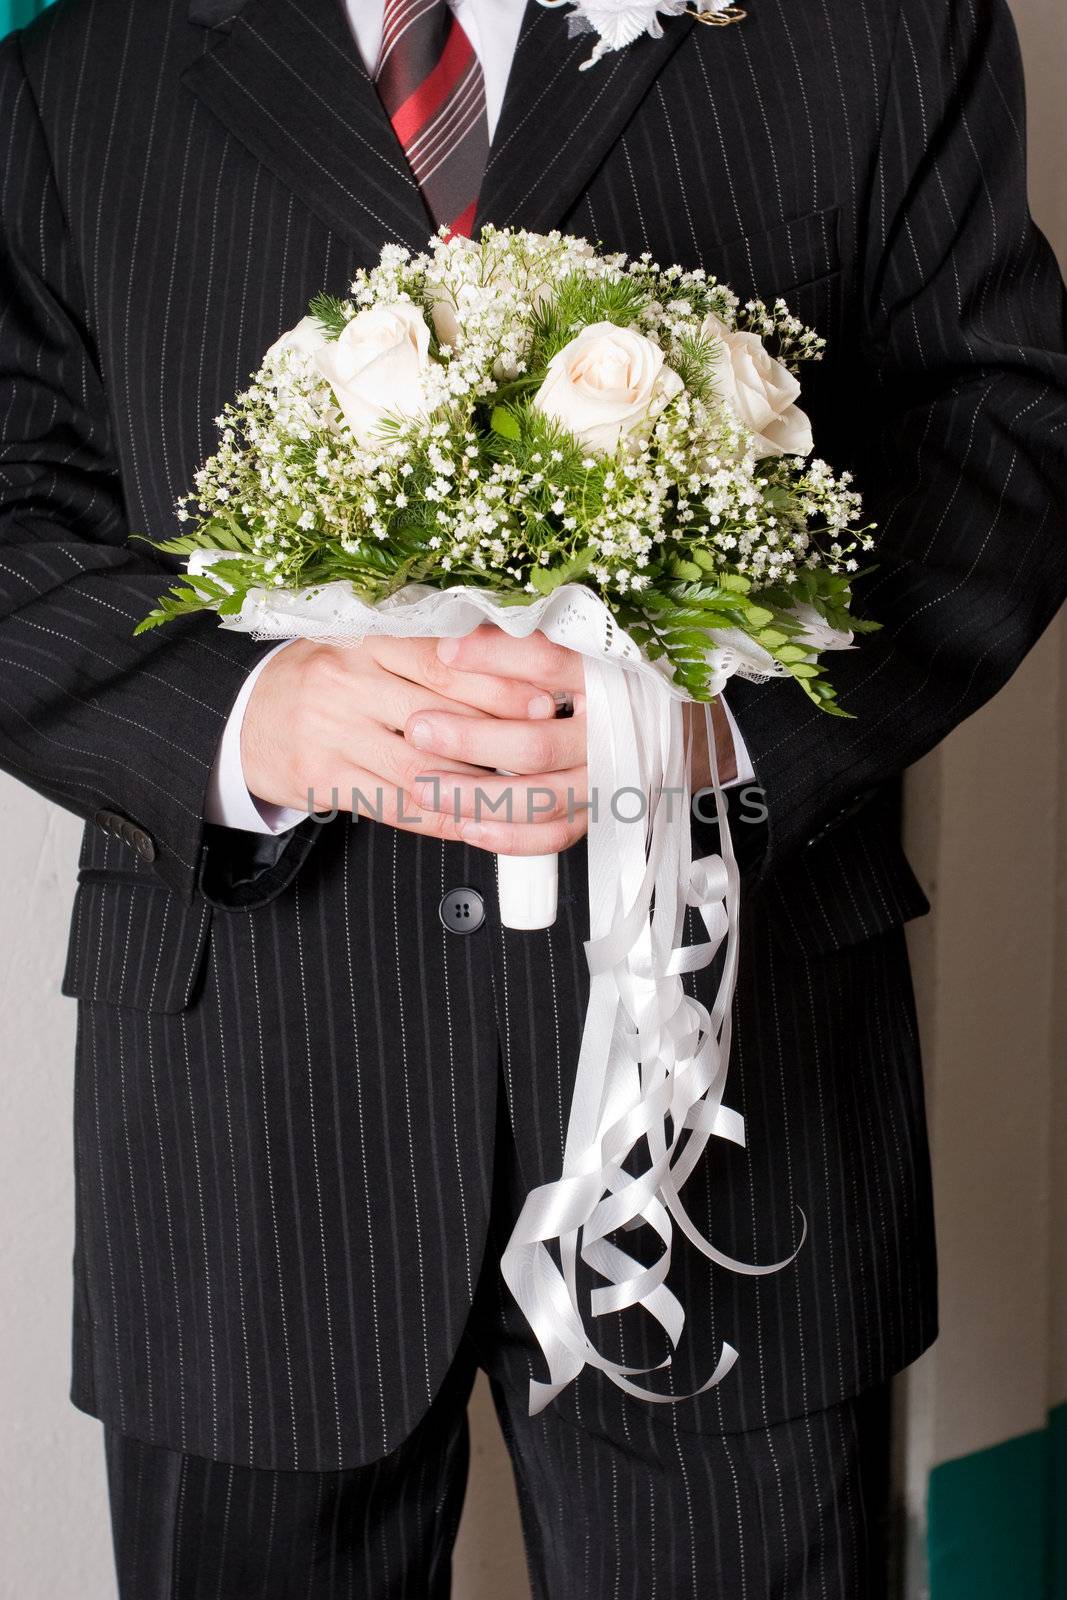 a beautiful flower bouquet in the hands of a man